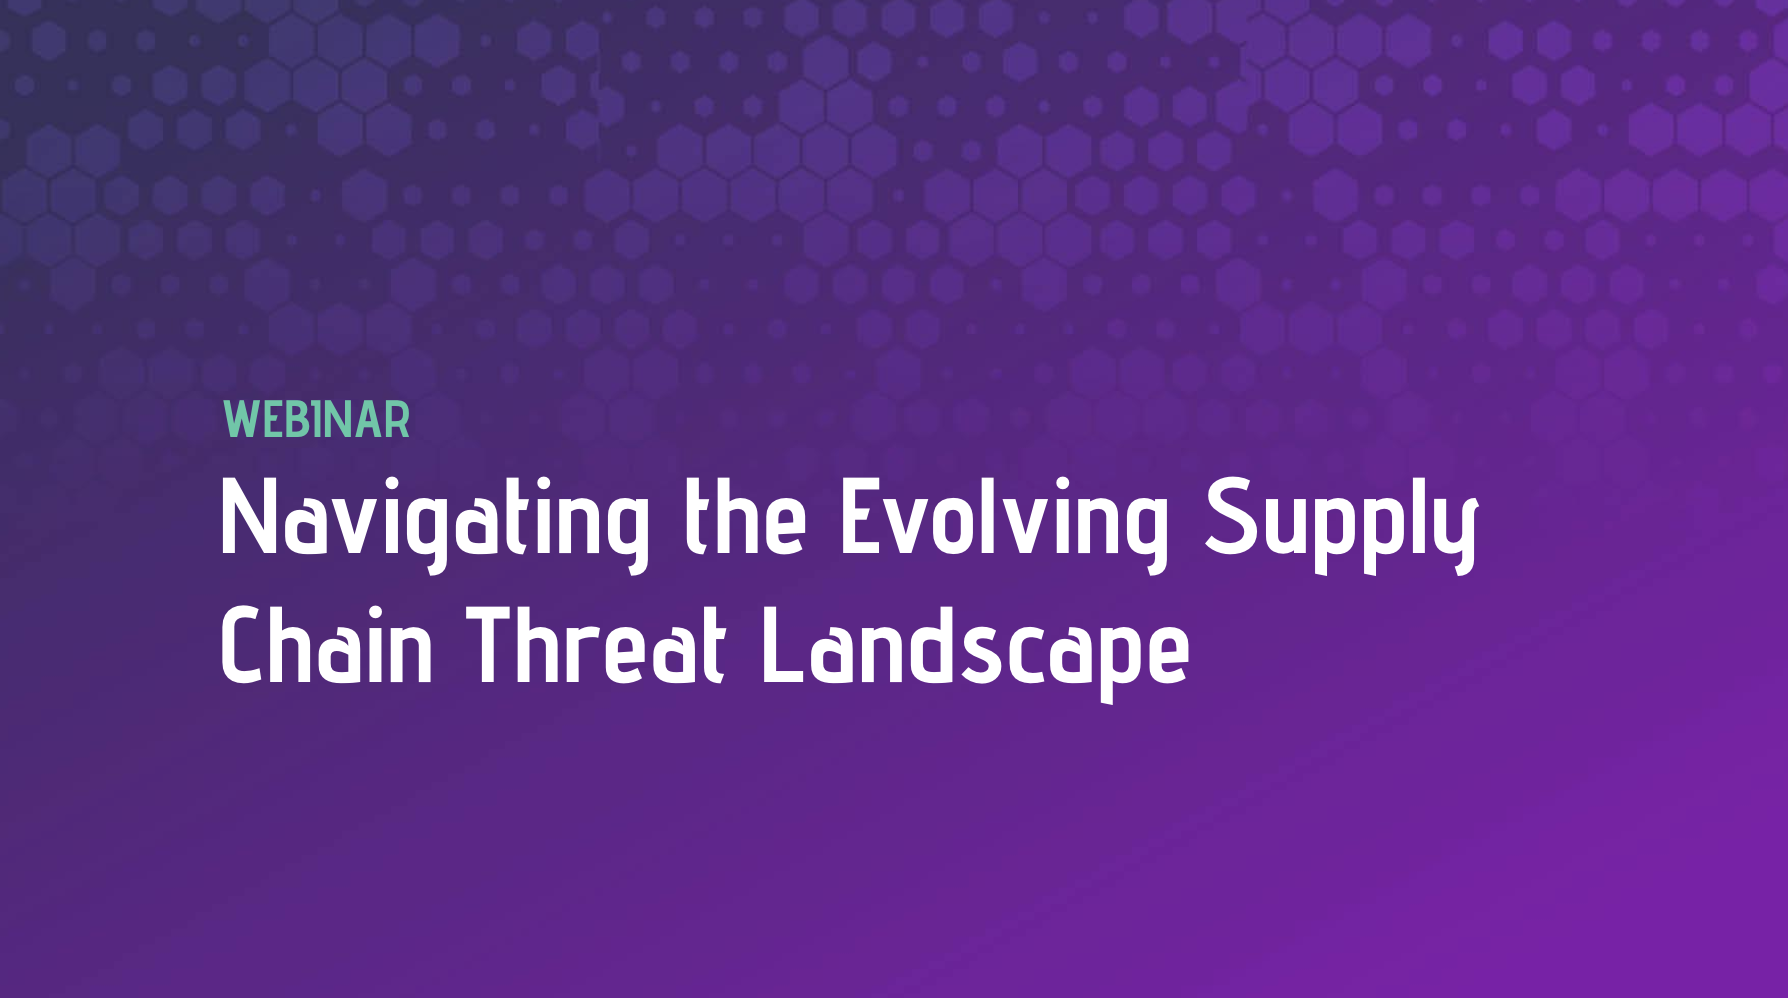 Navigating the Evolving Supply Chain Threat Landscape